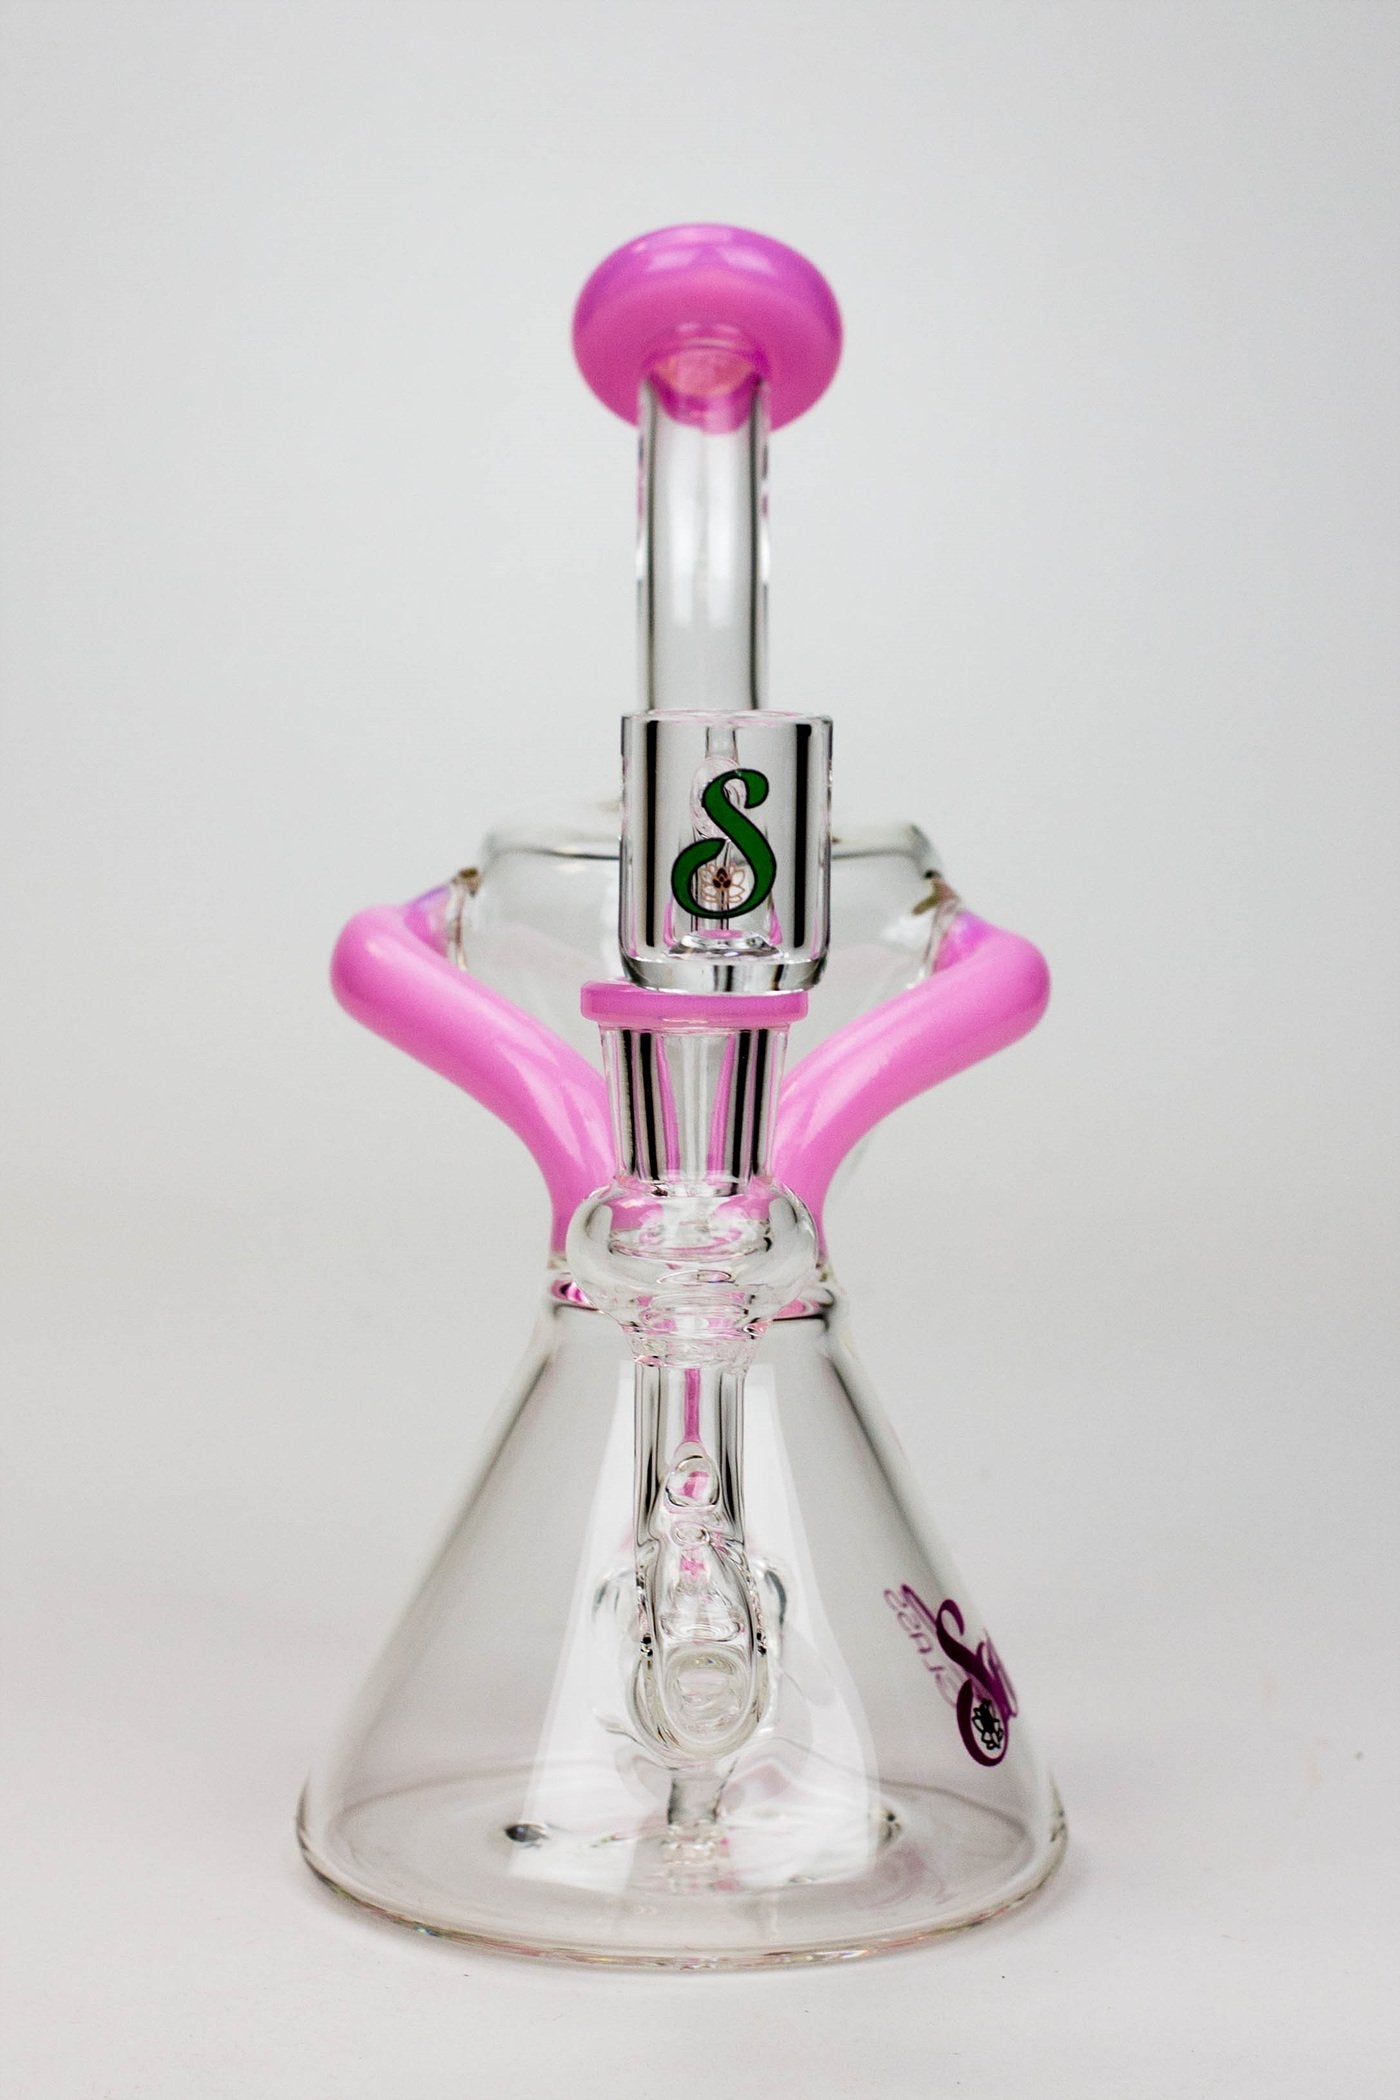 8" SOUL Glass 2-in-1 single chamber recycler bong_7